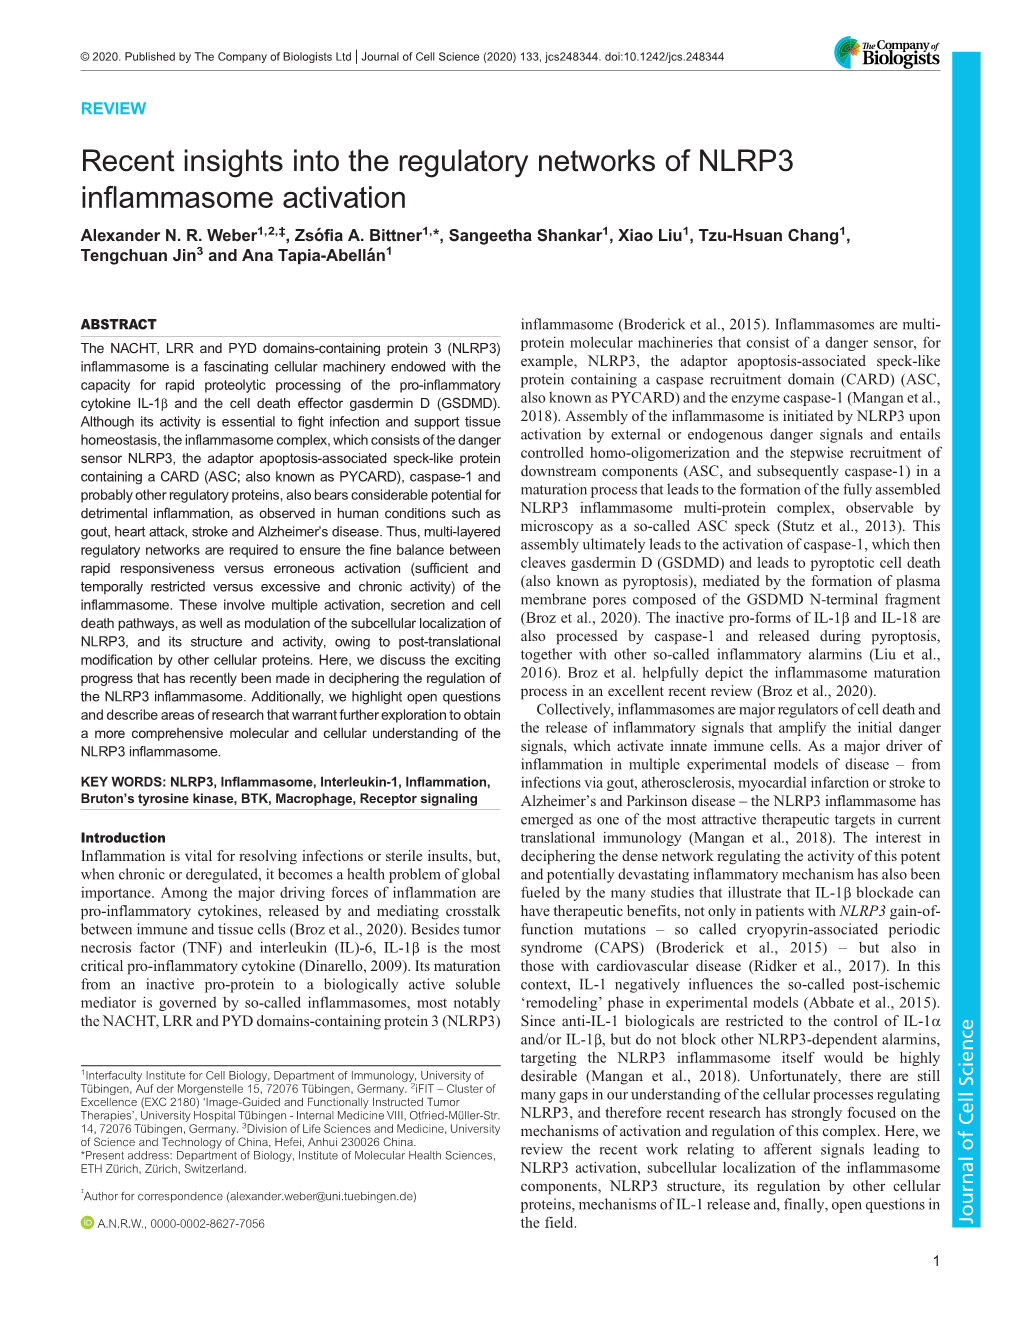 Recent Insights Into the Regulatory Networks of NLRP3 Inflammasome Activation Alexander N